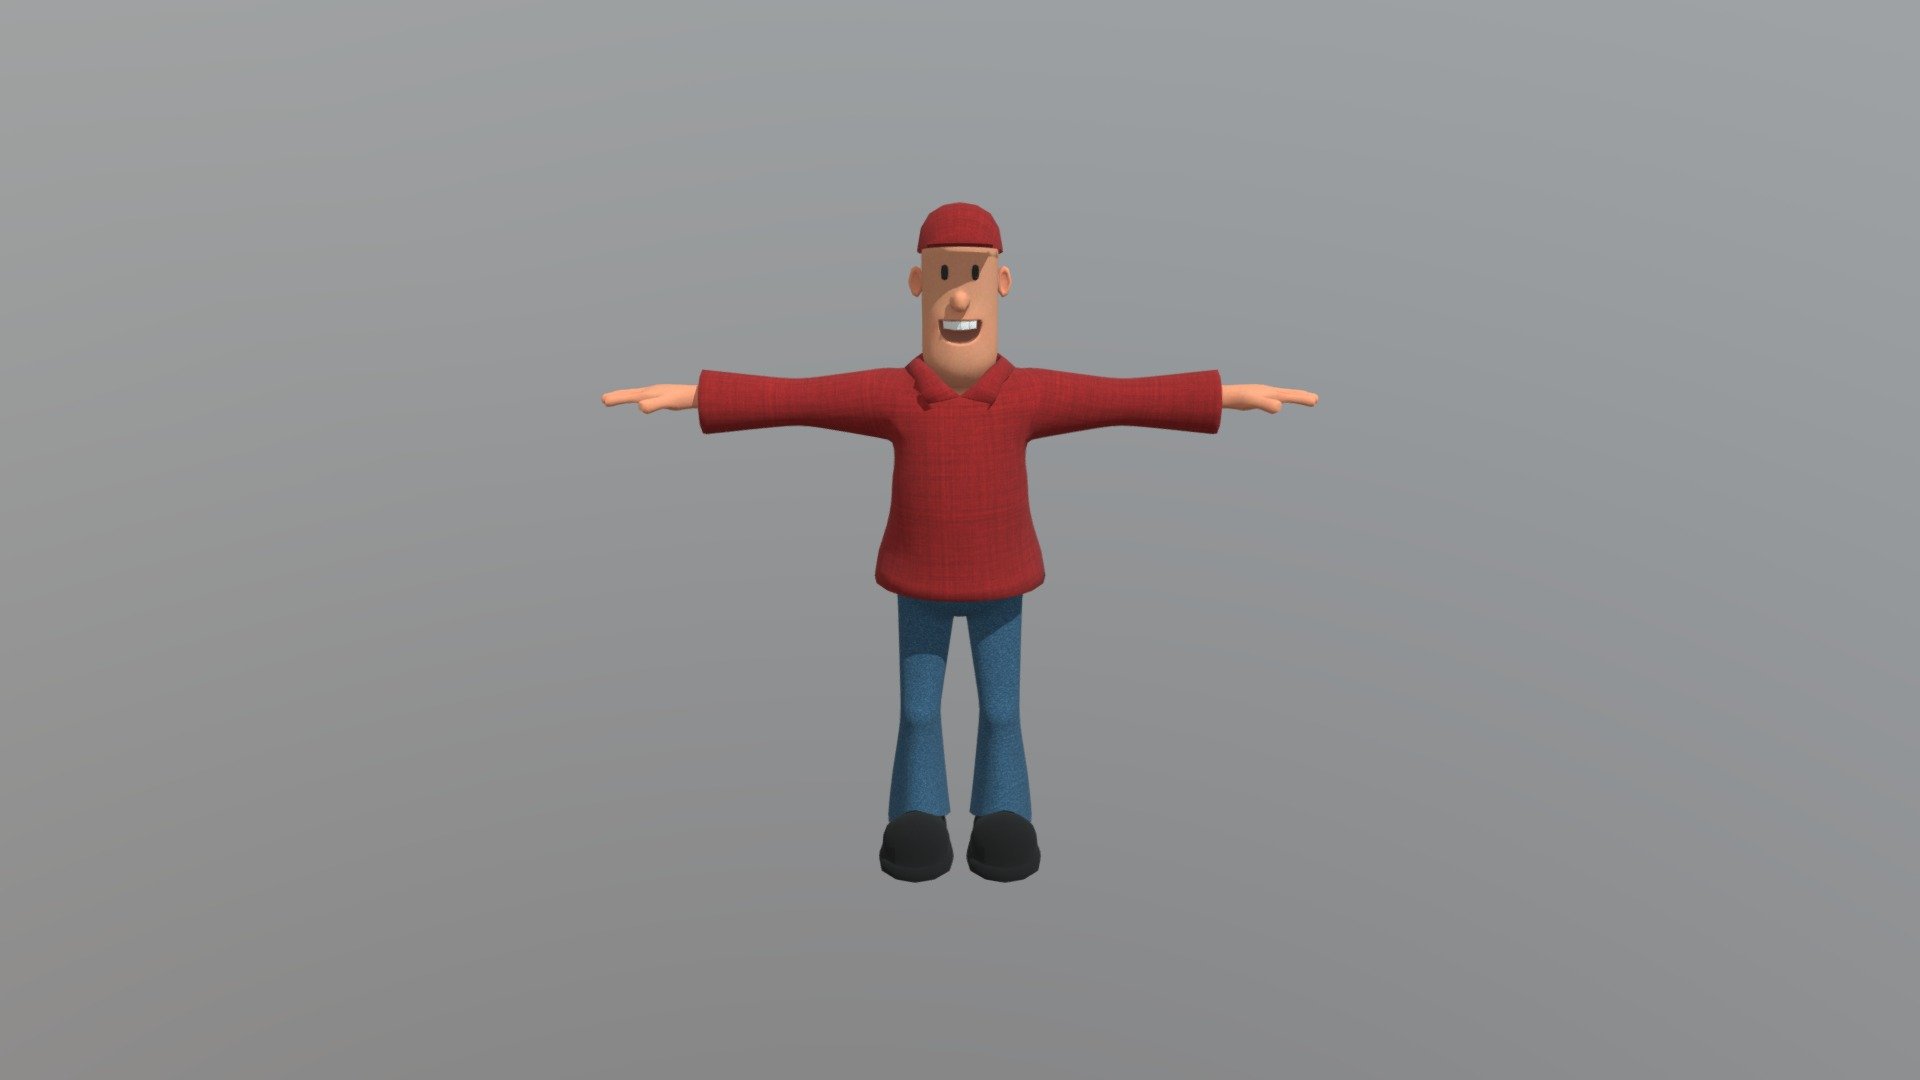 A simple cartoon Low poly un-rigged Character modeled in Cinema 4D. UVs. all objects in one texture map.
All objects are seperated so you can use this as a base mesh as well to create different characters of your own.
Formats included: C4D, BLEND, OBJ, FBX, MAX, MB 3d model